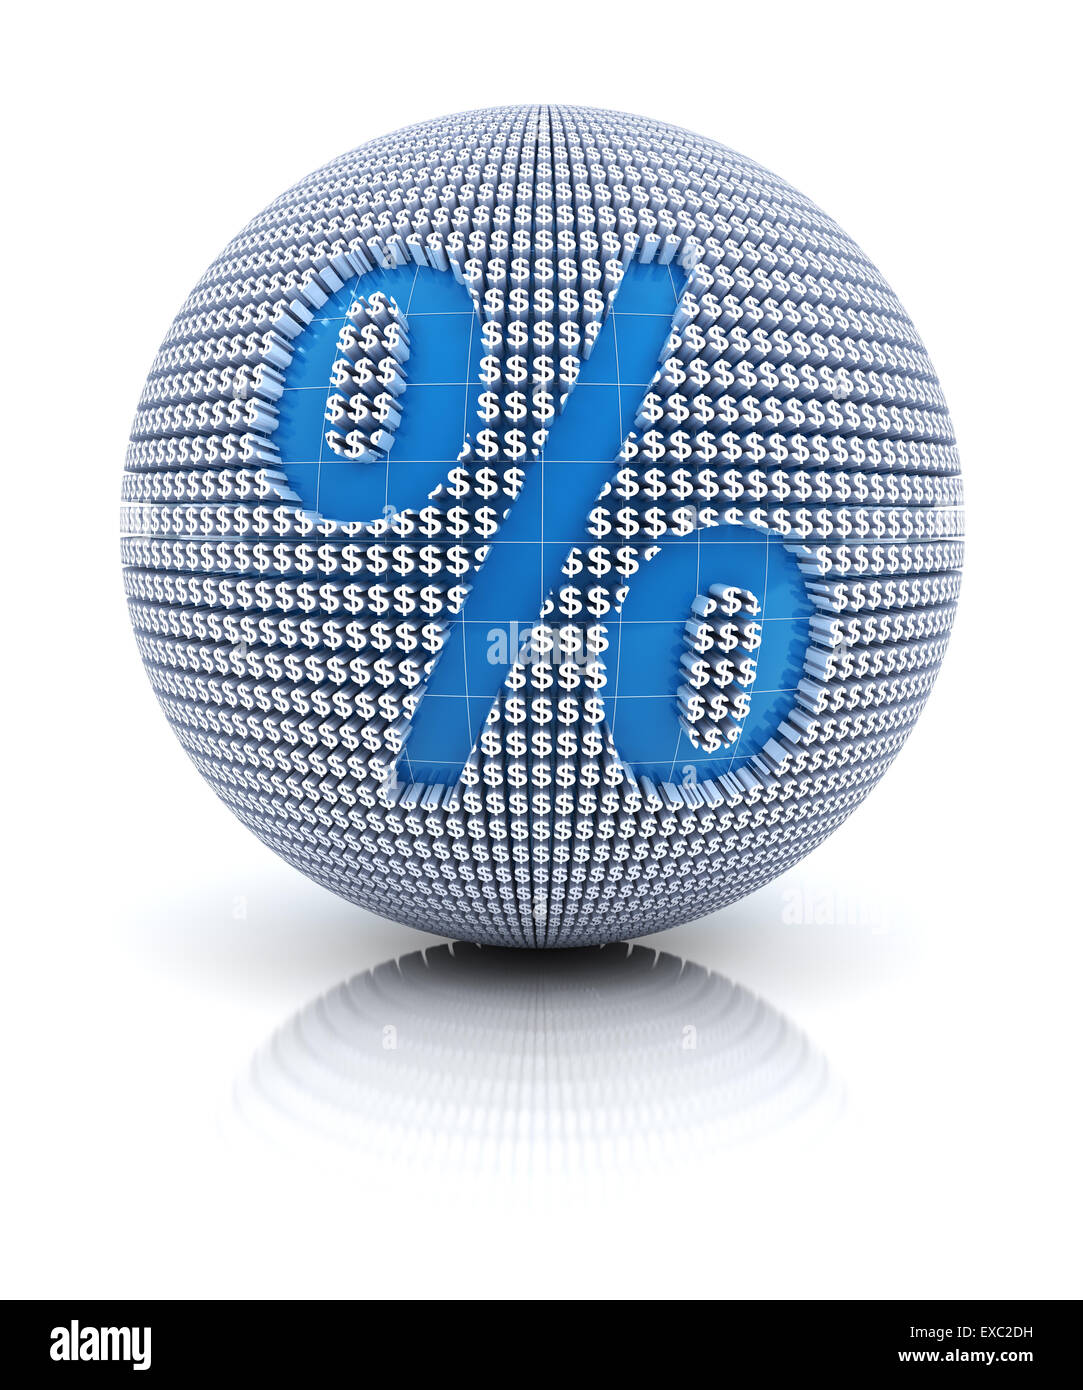 Percentage icon on globe formed by dollar sign Stock Photo